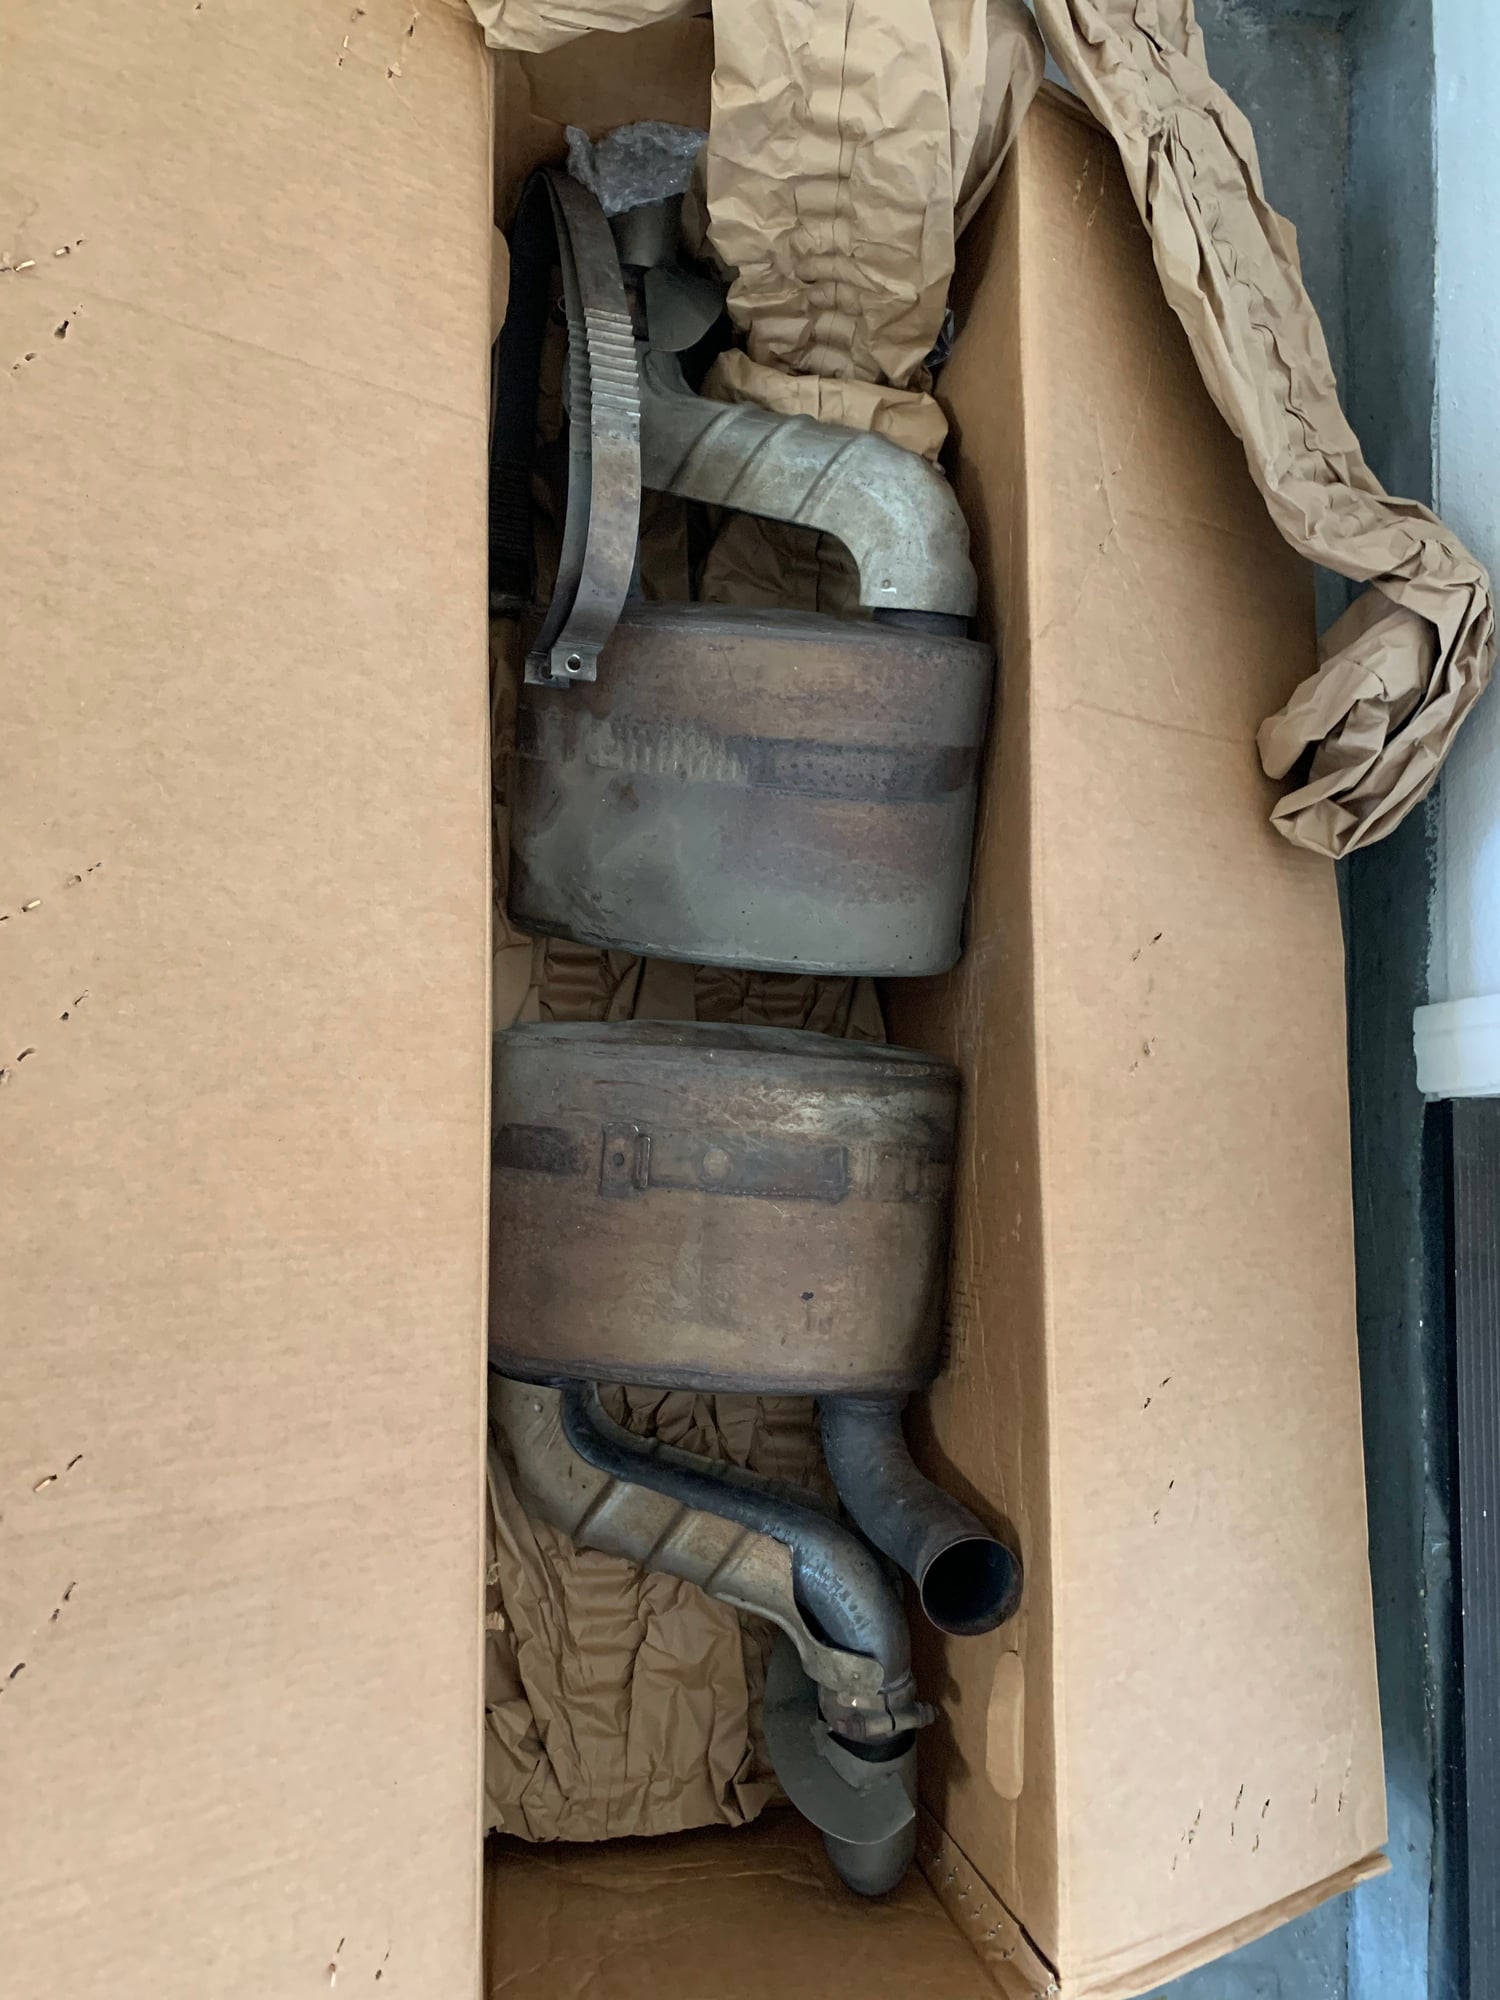 Engine - Exhaust - 993 Turbo Mufflers and Tips - Used - 1996 to 1998 Porsche 911 - San Diego, CA 92131, United States